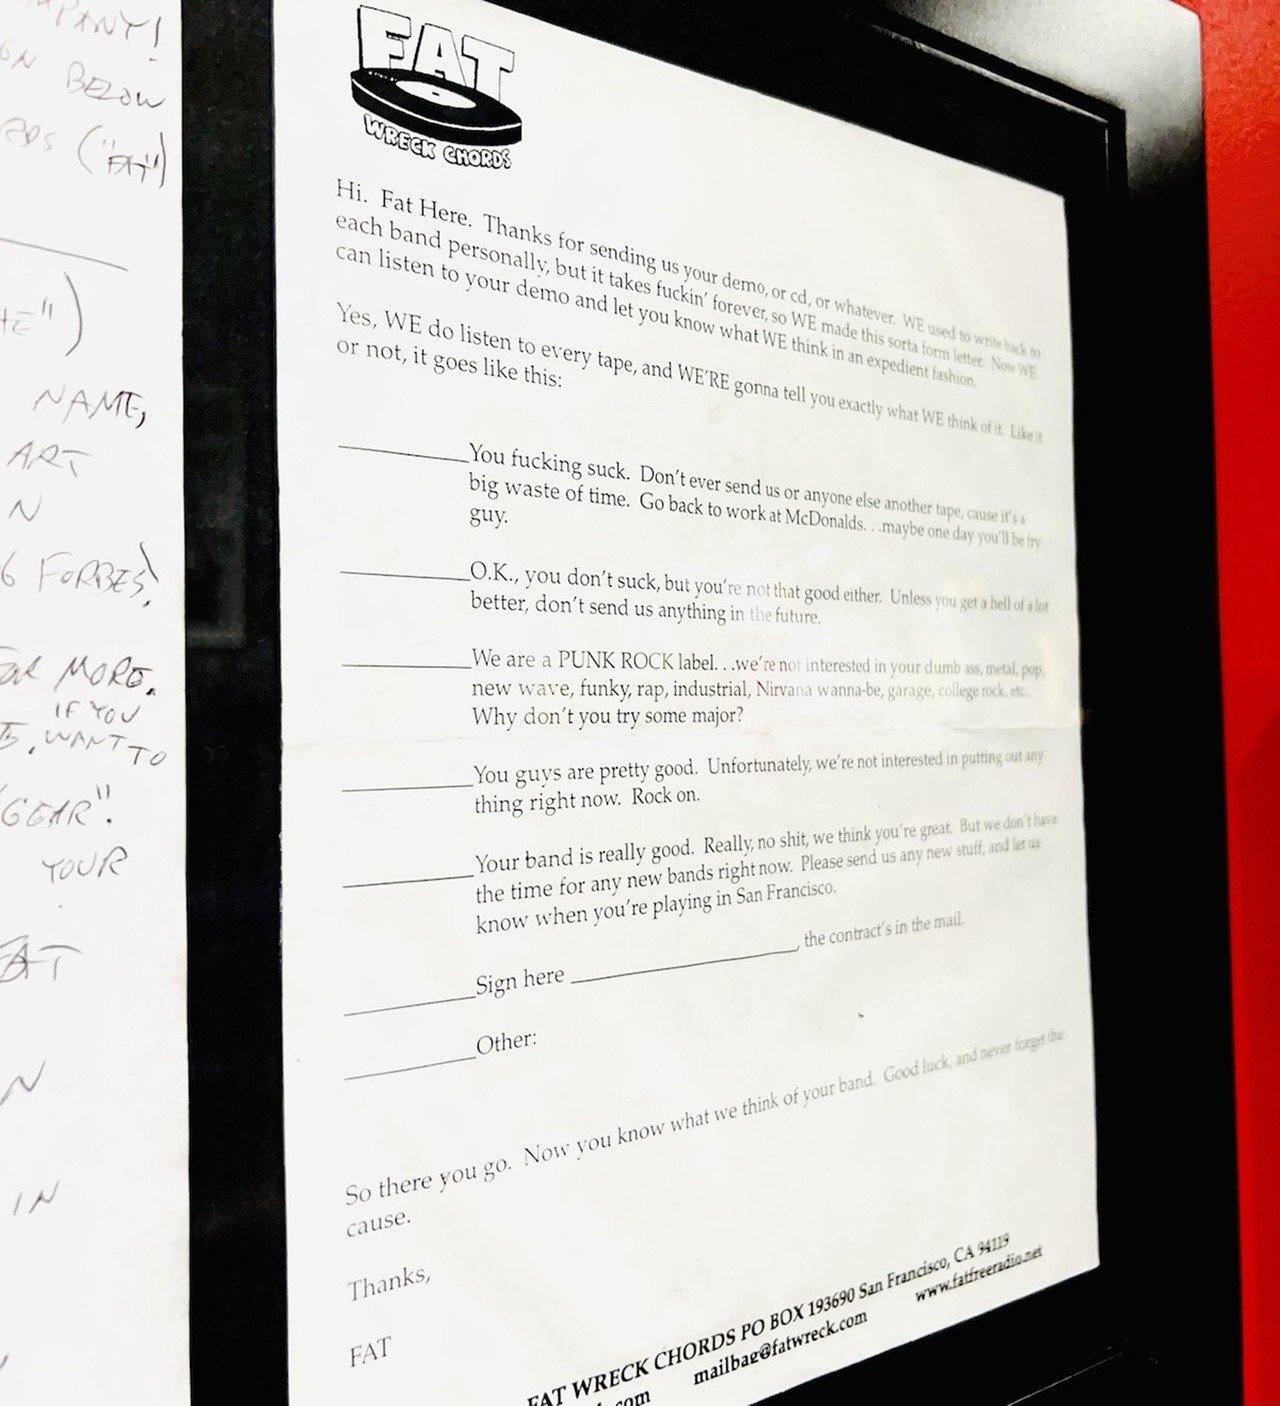 Official Fat Wreck Chords response letter | The Punk Rock Museum in Las Vegas, Nevada